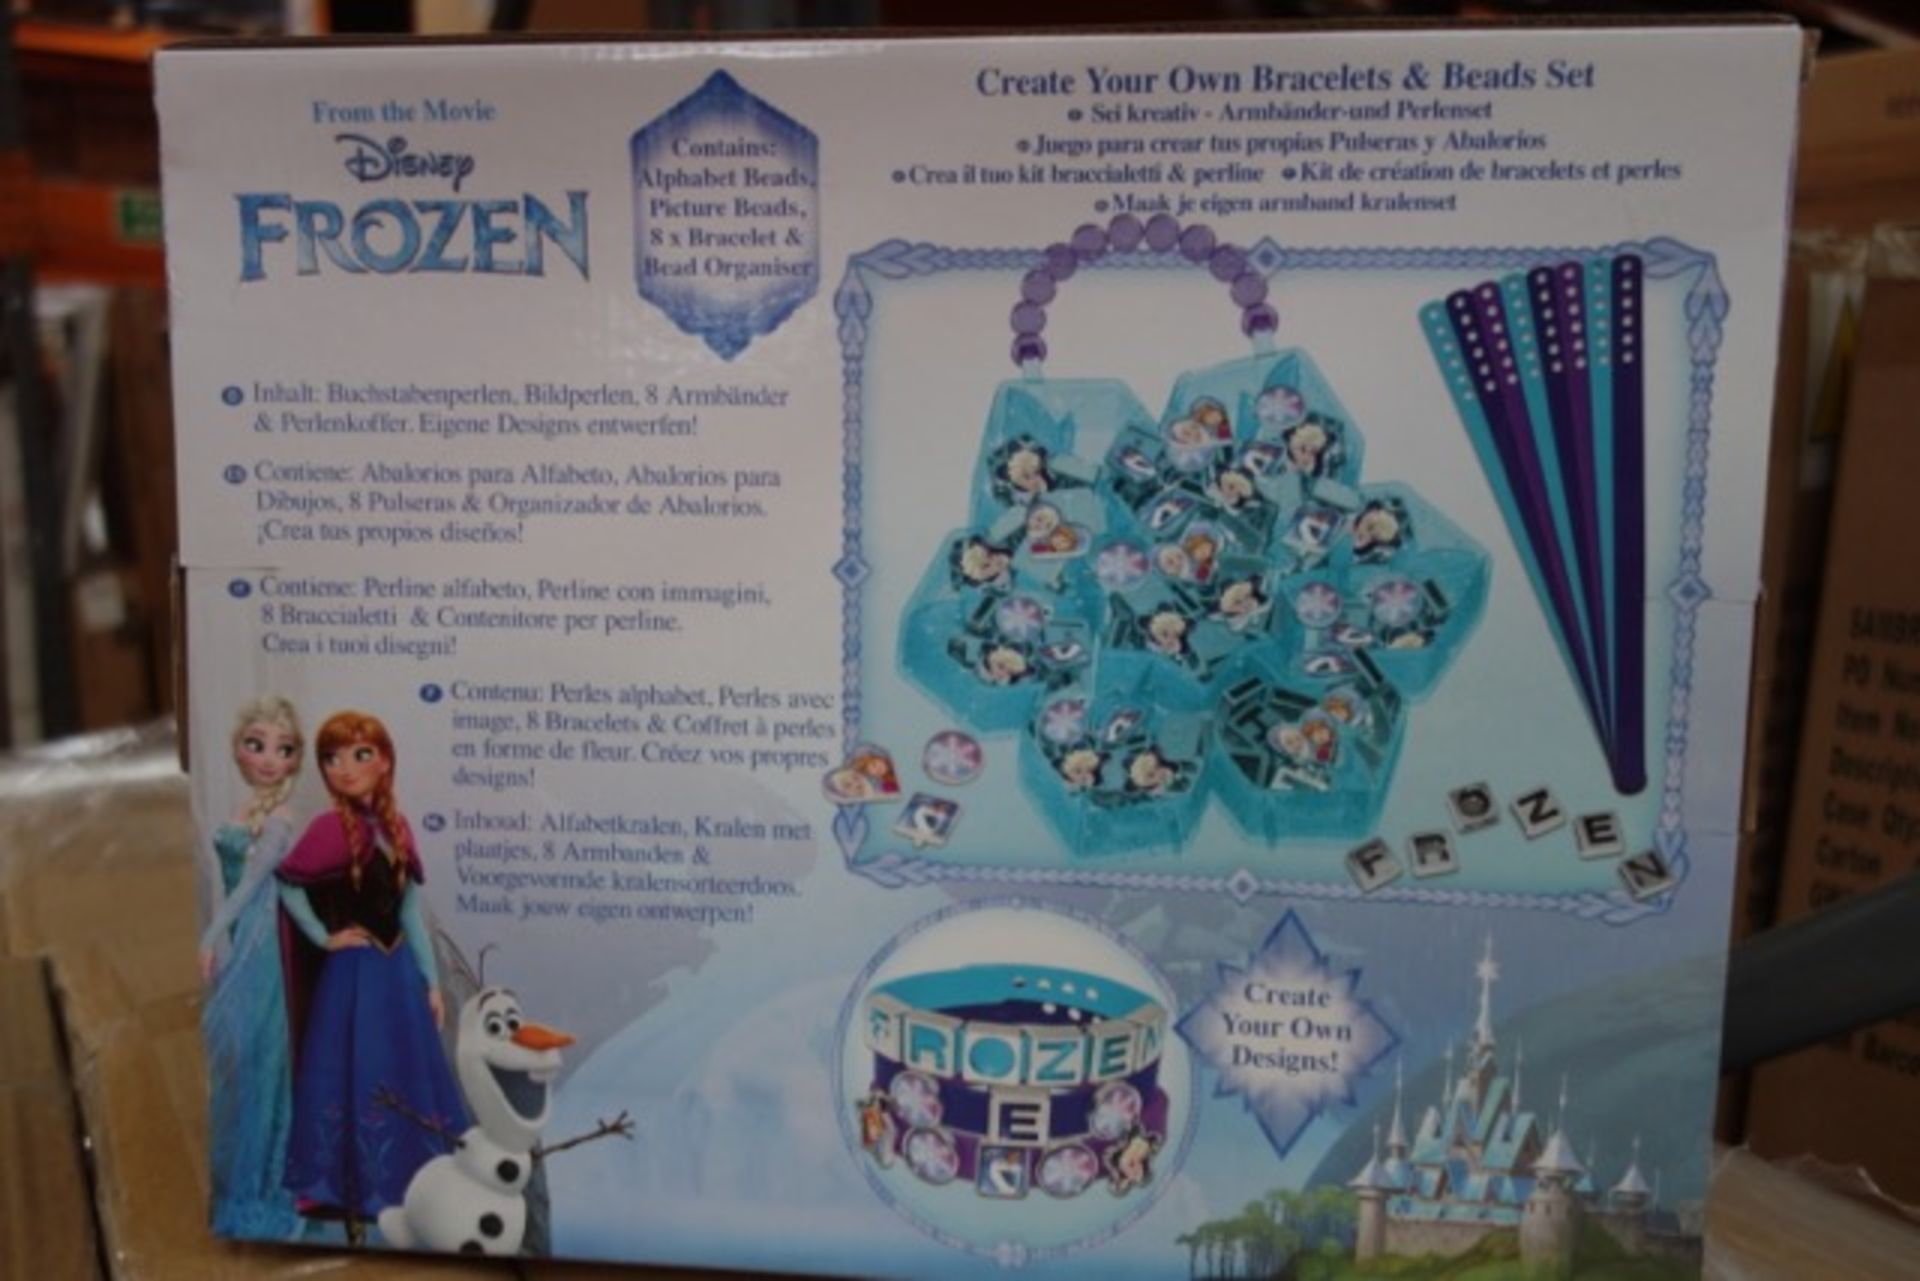 18 x Disney Frozen Create Your Own Bracelets & Beads Large Play Set's. Brand new stock from a - Image 2 of 2